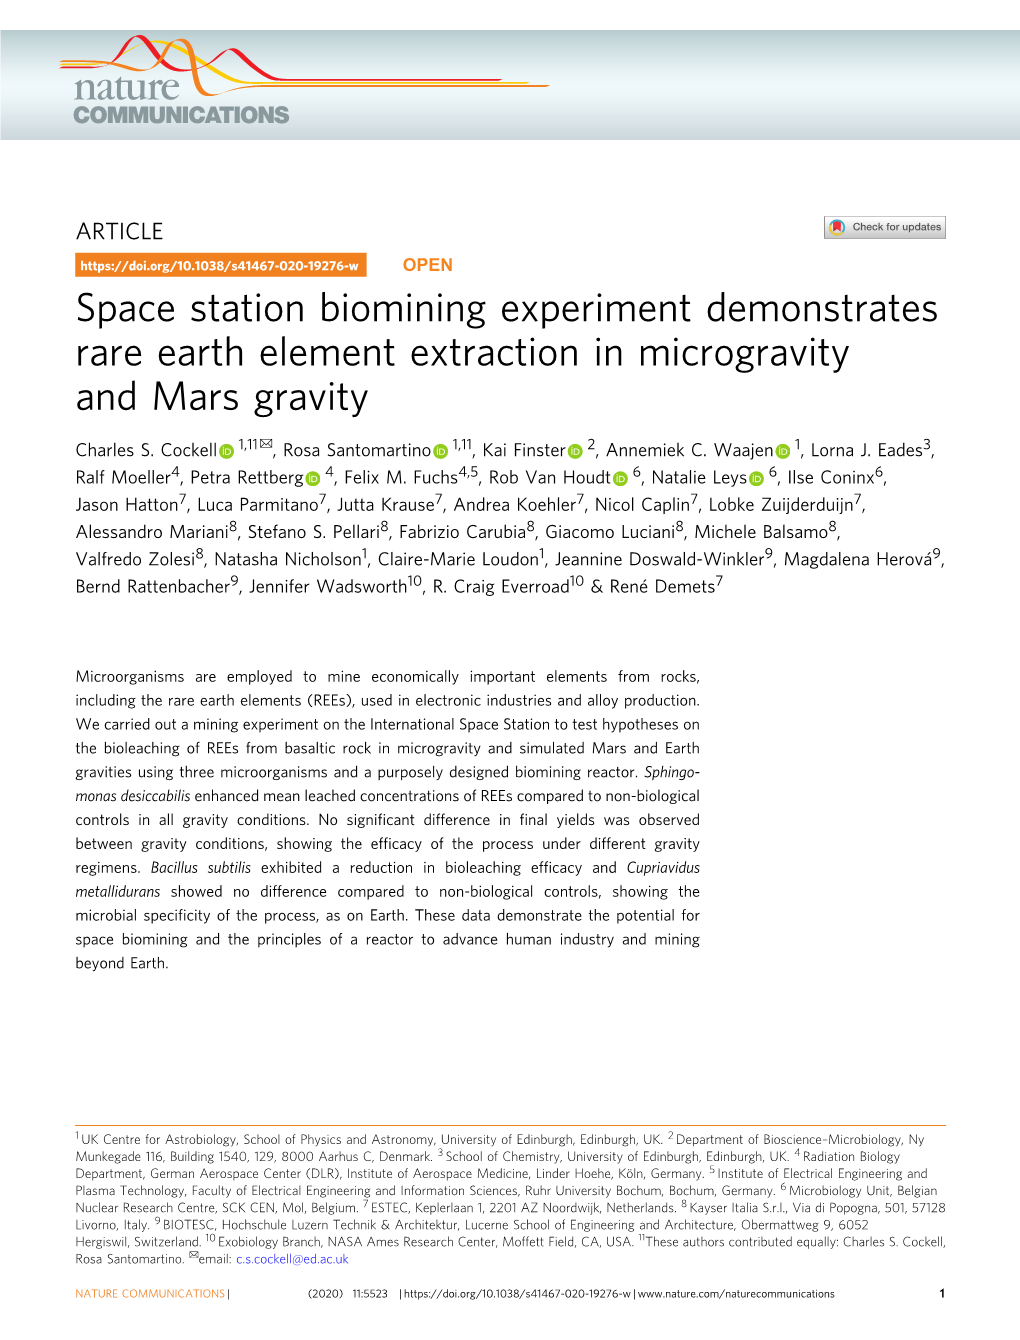 Space Station Biomining Experiment Demonstrates Rare Earth Element Extraction in Microgravity and Mars Gravity ✉ Charles S